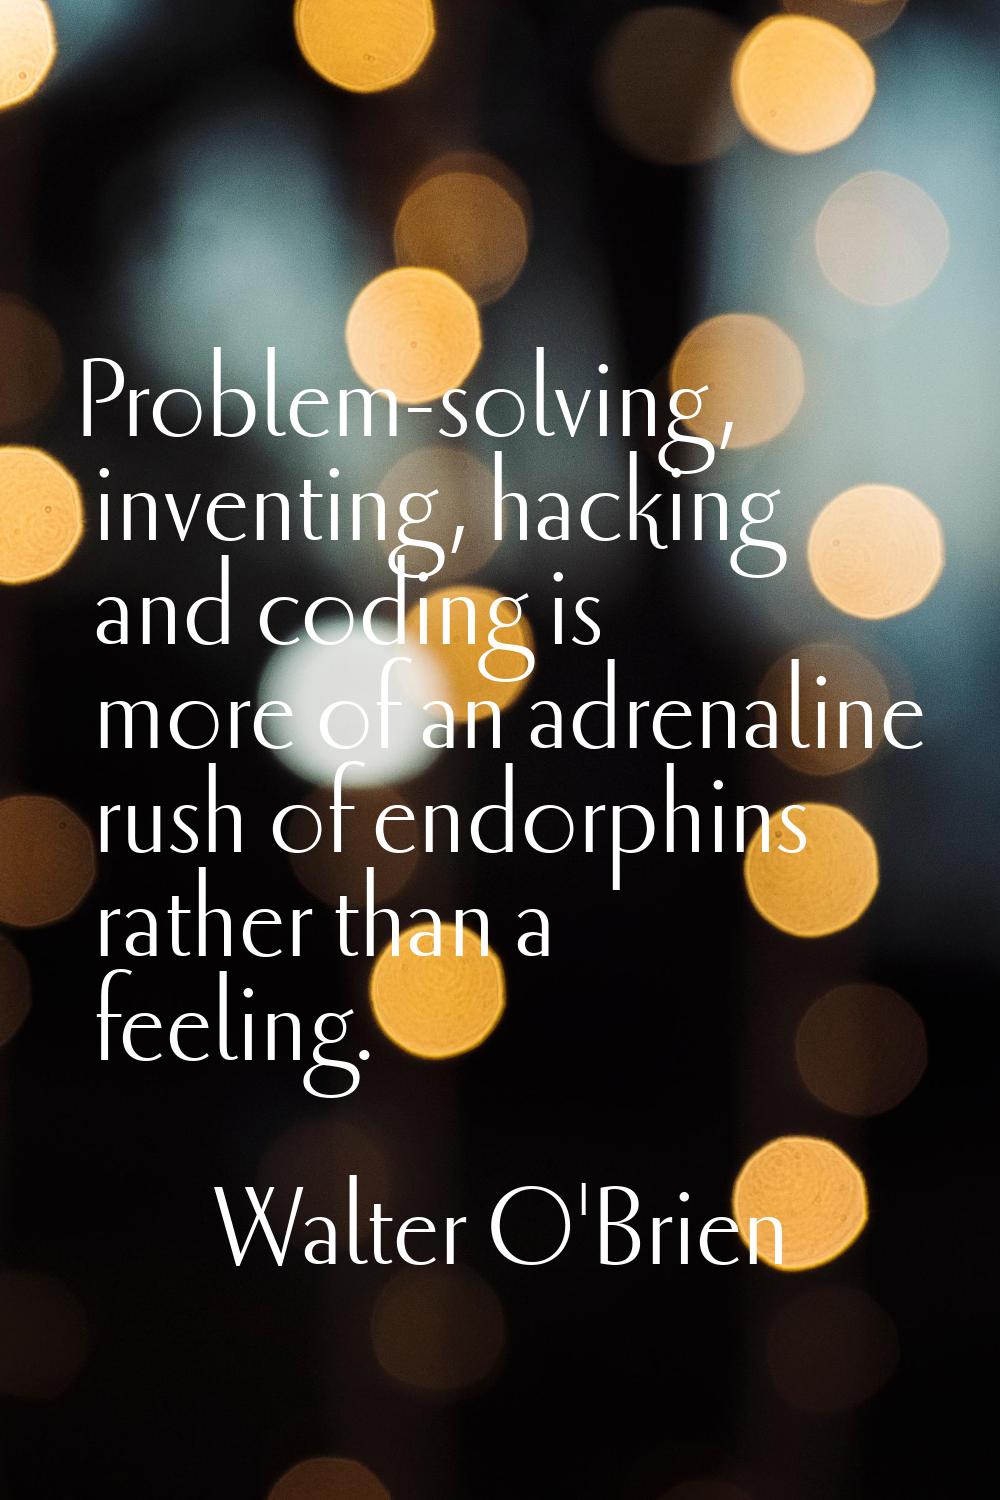 Problem-solving, inventing, hacking and coding is more of an adrenaline rush of endorphins rather t